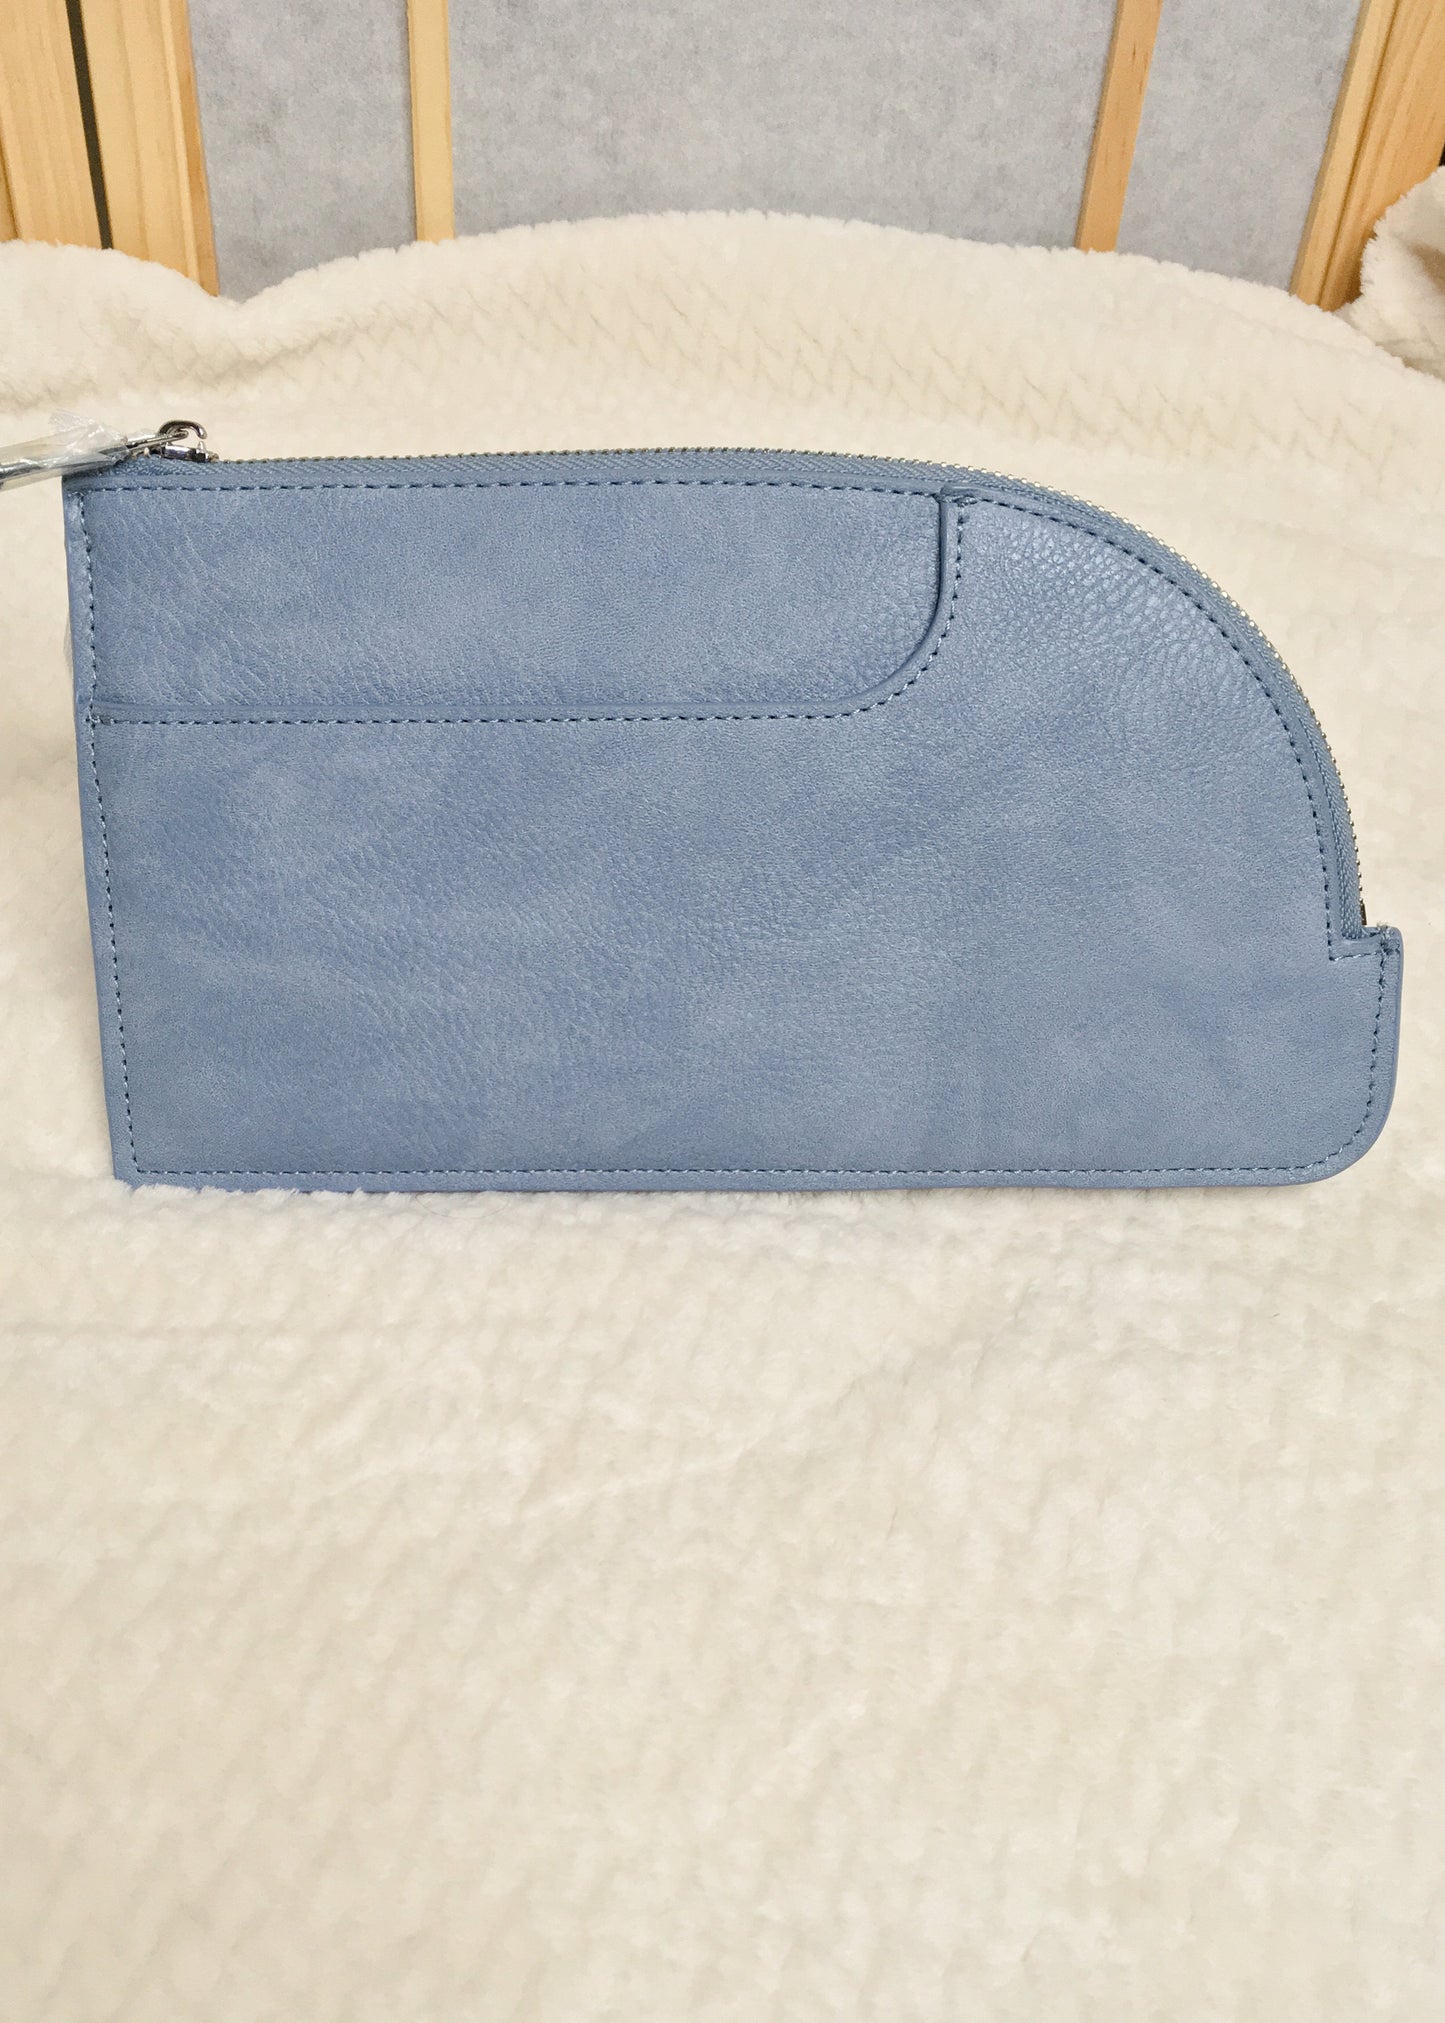 Save the Girls Sling Bag in Blue